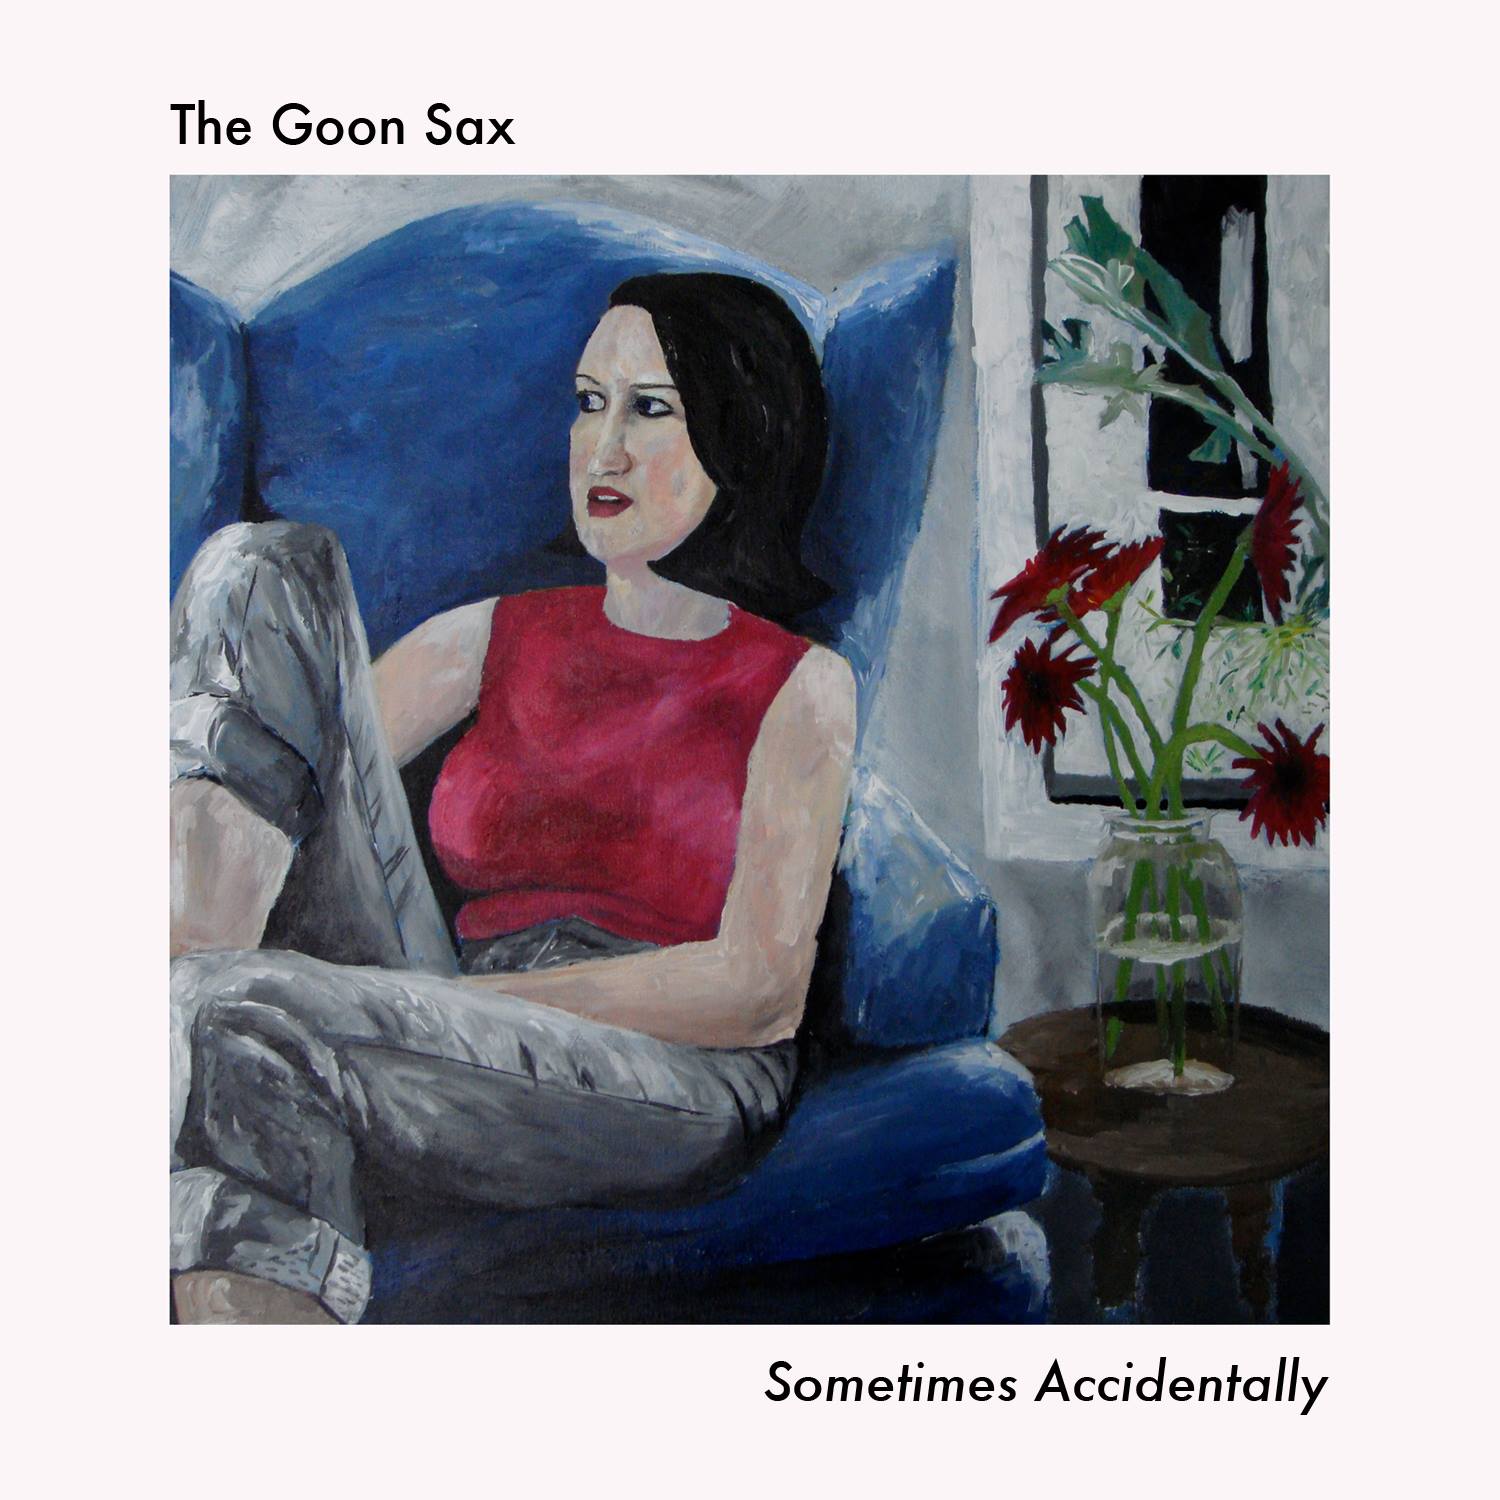 The Goon Sax - Sometimes Accidentally